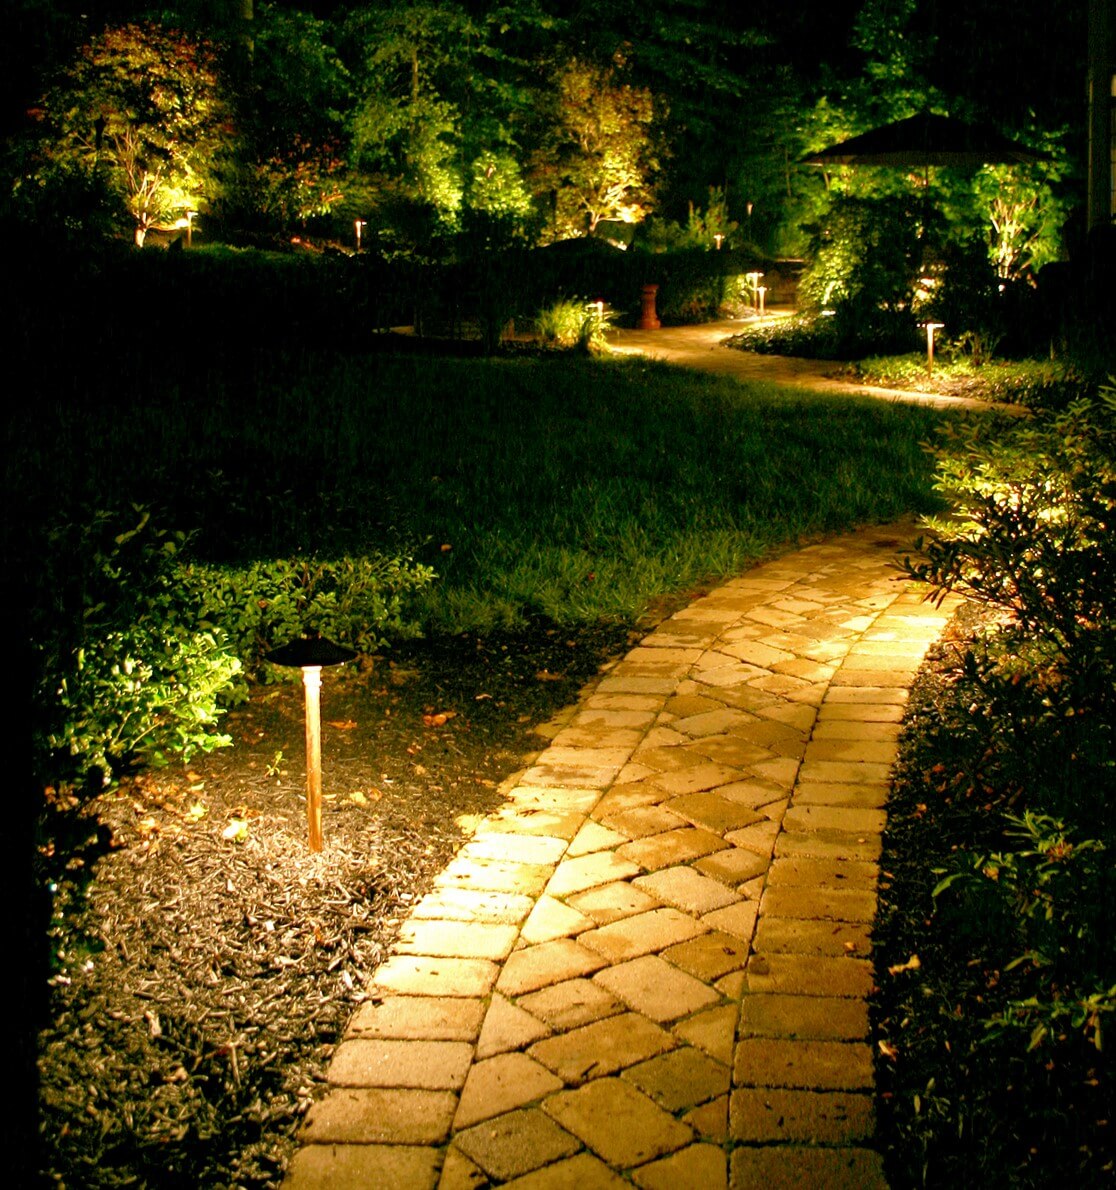 Bright Lights along the Path